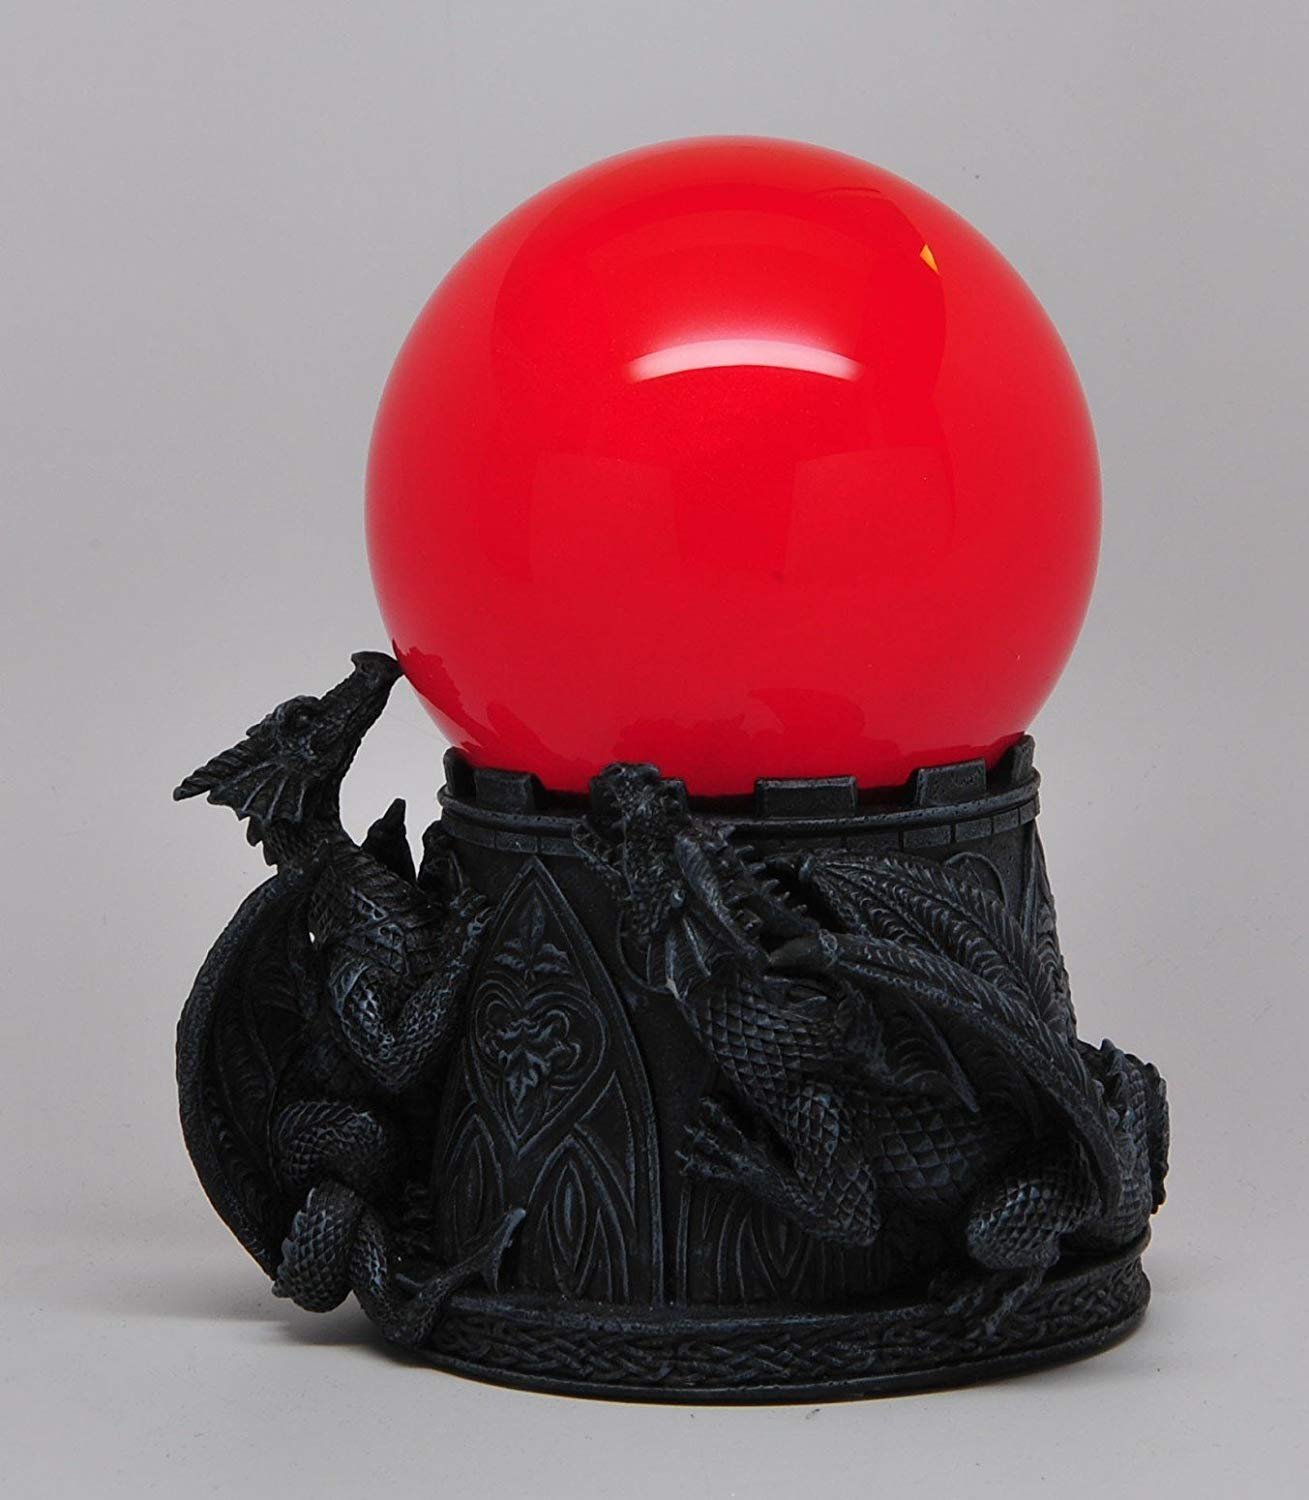 6.5 Inch Dragon Sandstorm with Giant Red Orbe Ball Statue Figurine